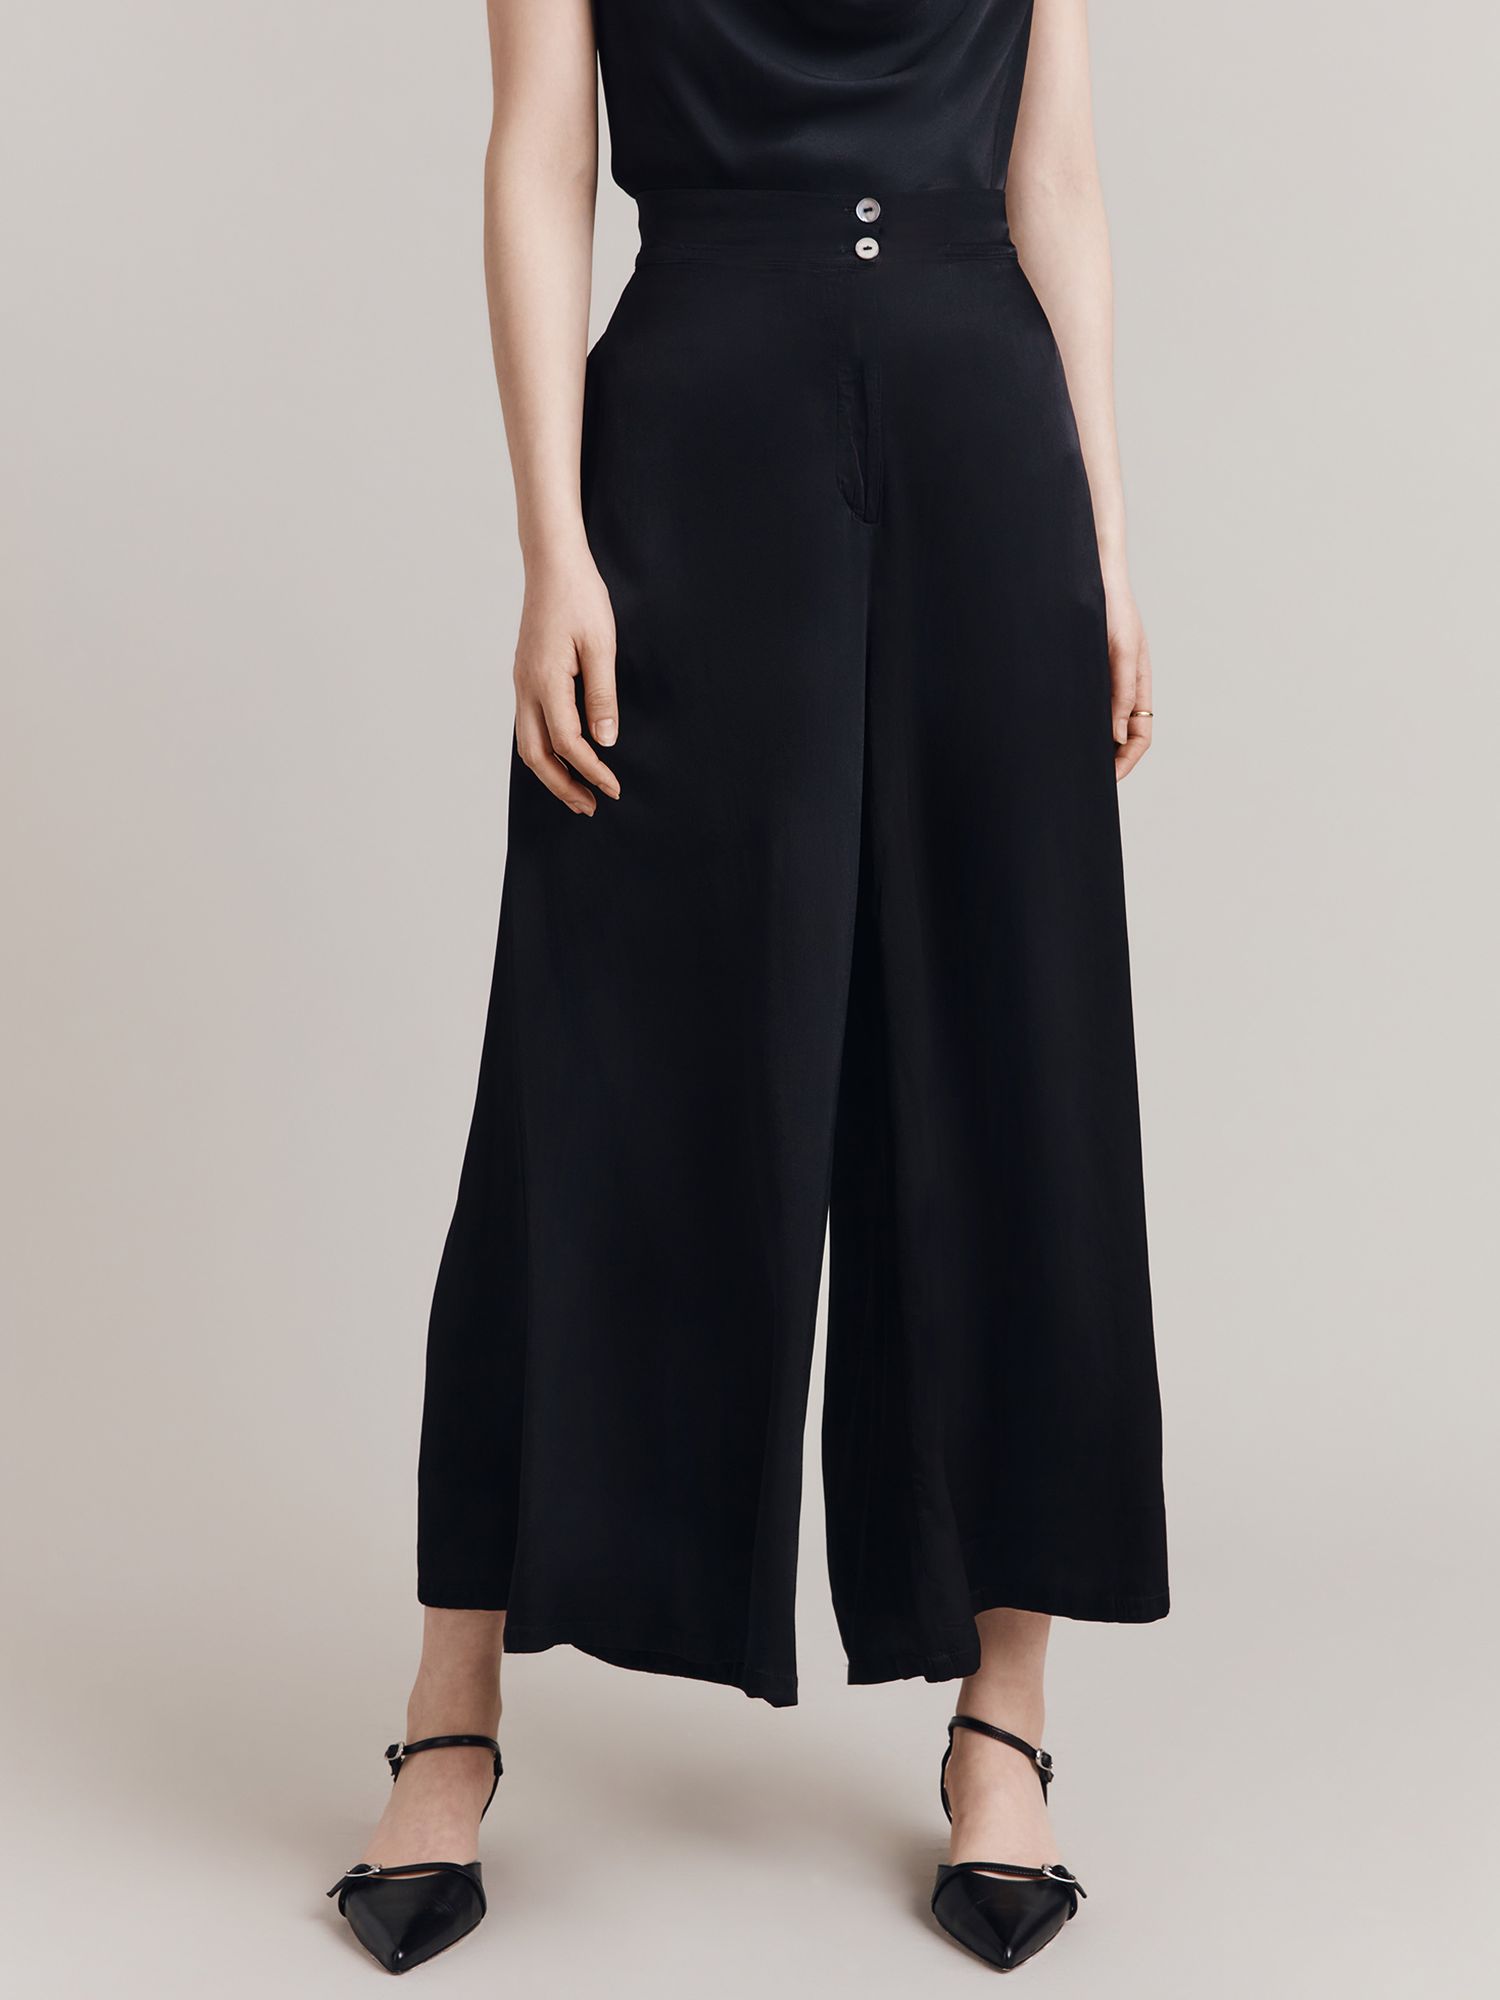 Ghost Blair Cropped Satin Culottes, Black, XS